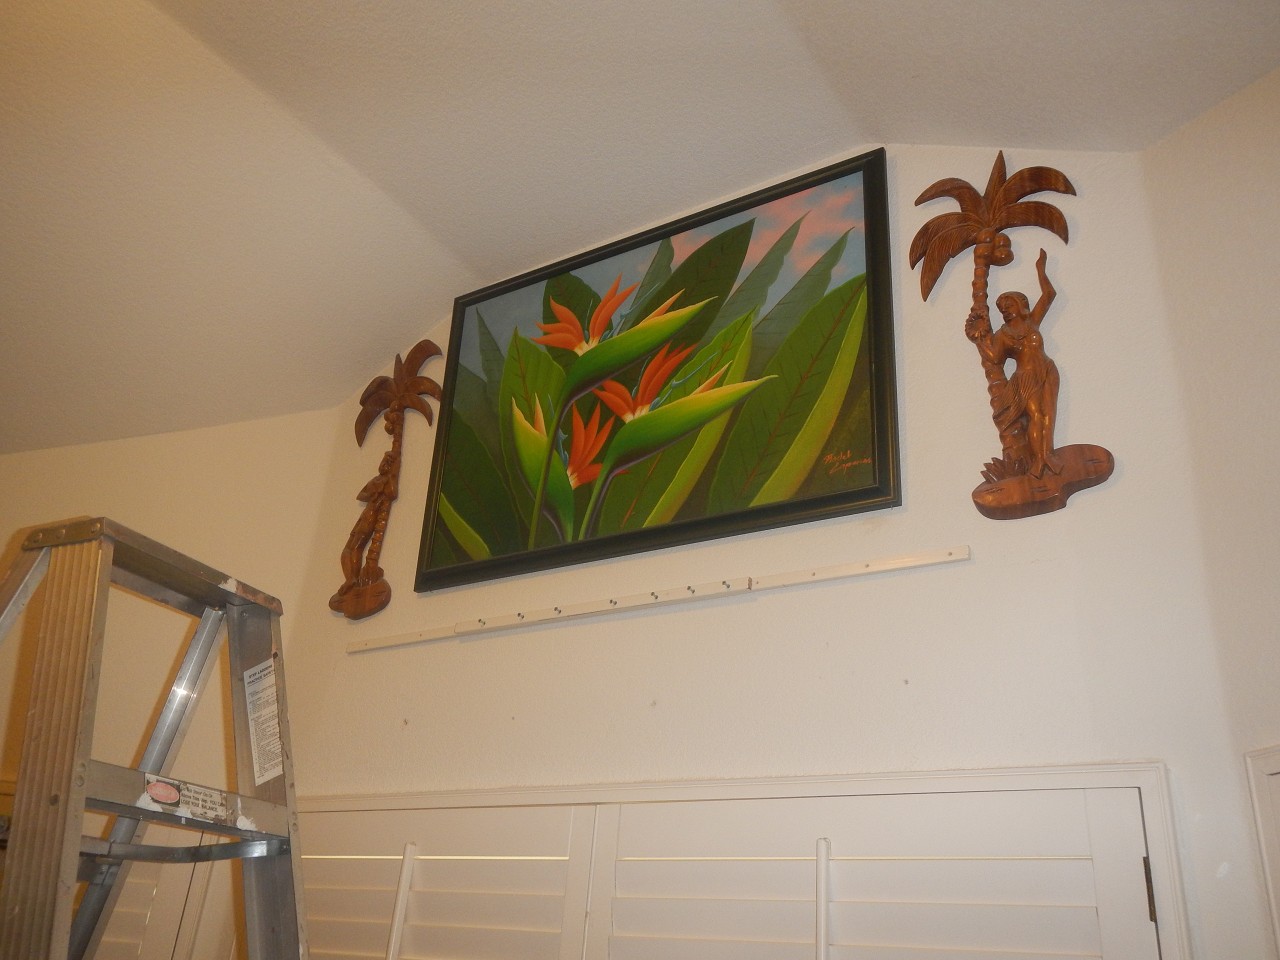 Nook redone and Zombie mugs into jungle room 7 19 23 on fb tc (3)